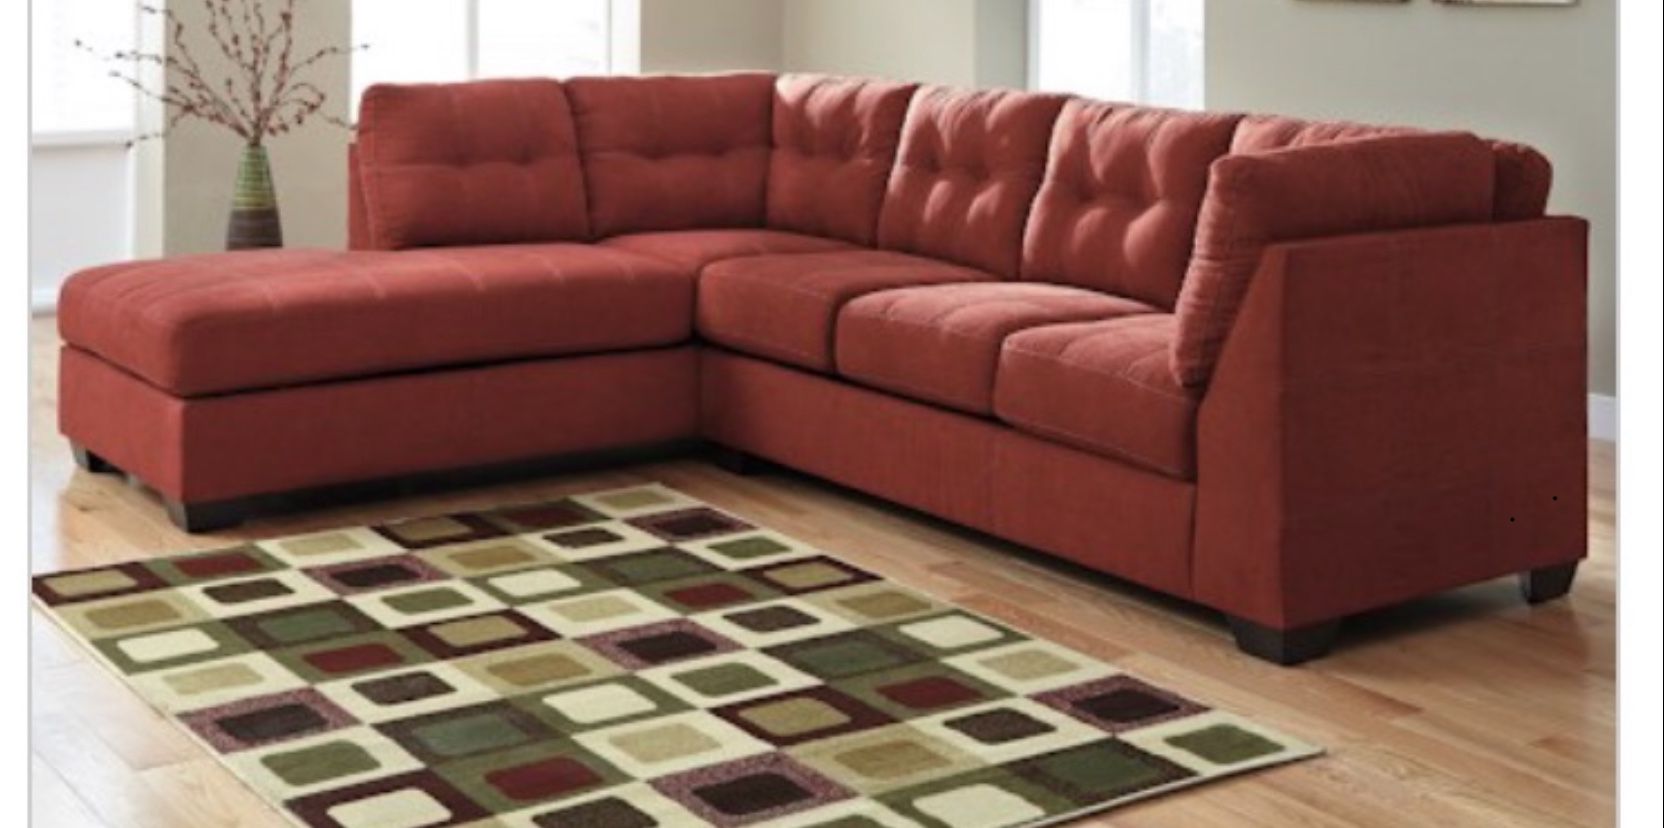 Value City Sierra colored sectional